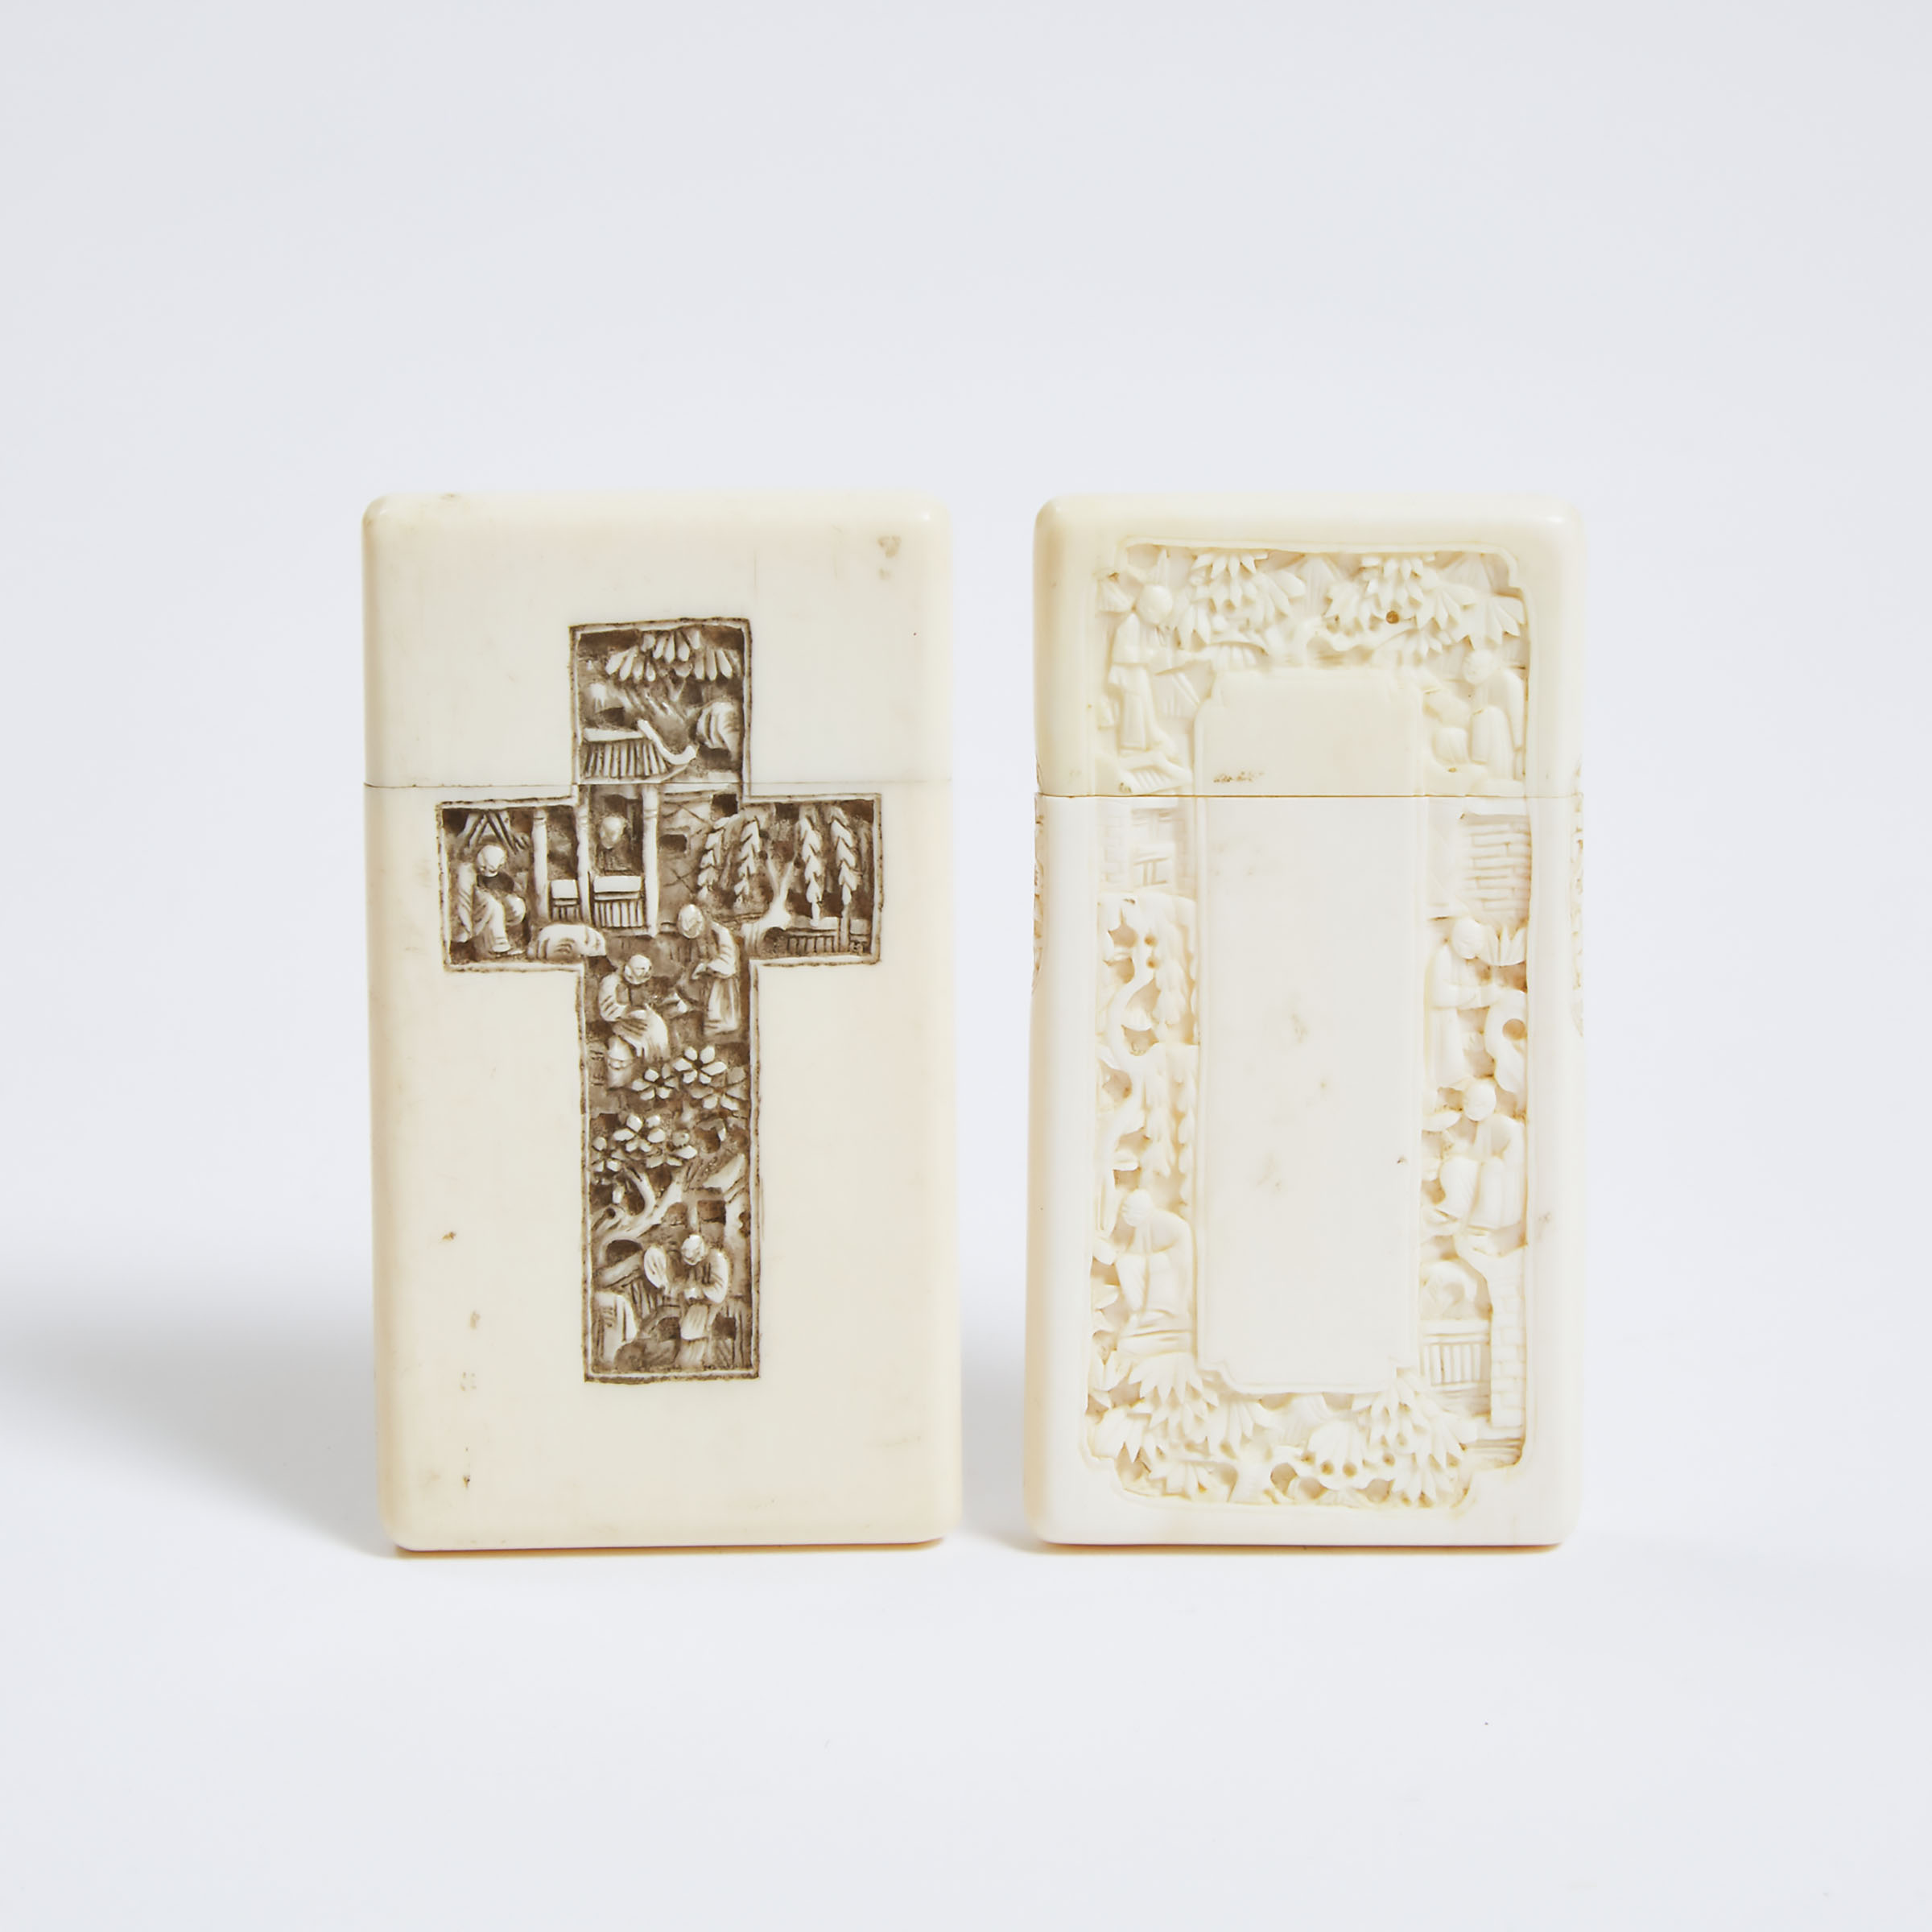 A Chinese Carved Ivory 'Christian Cross' Card Case, Together With a Card Case, 19th Century